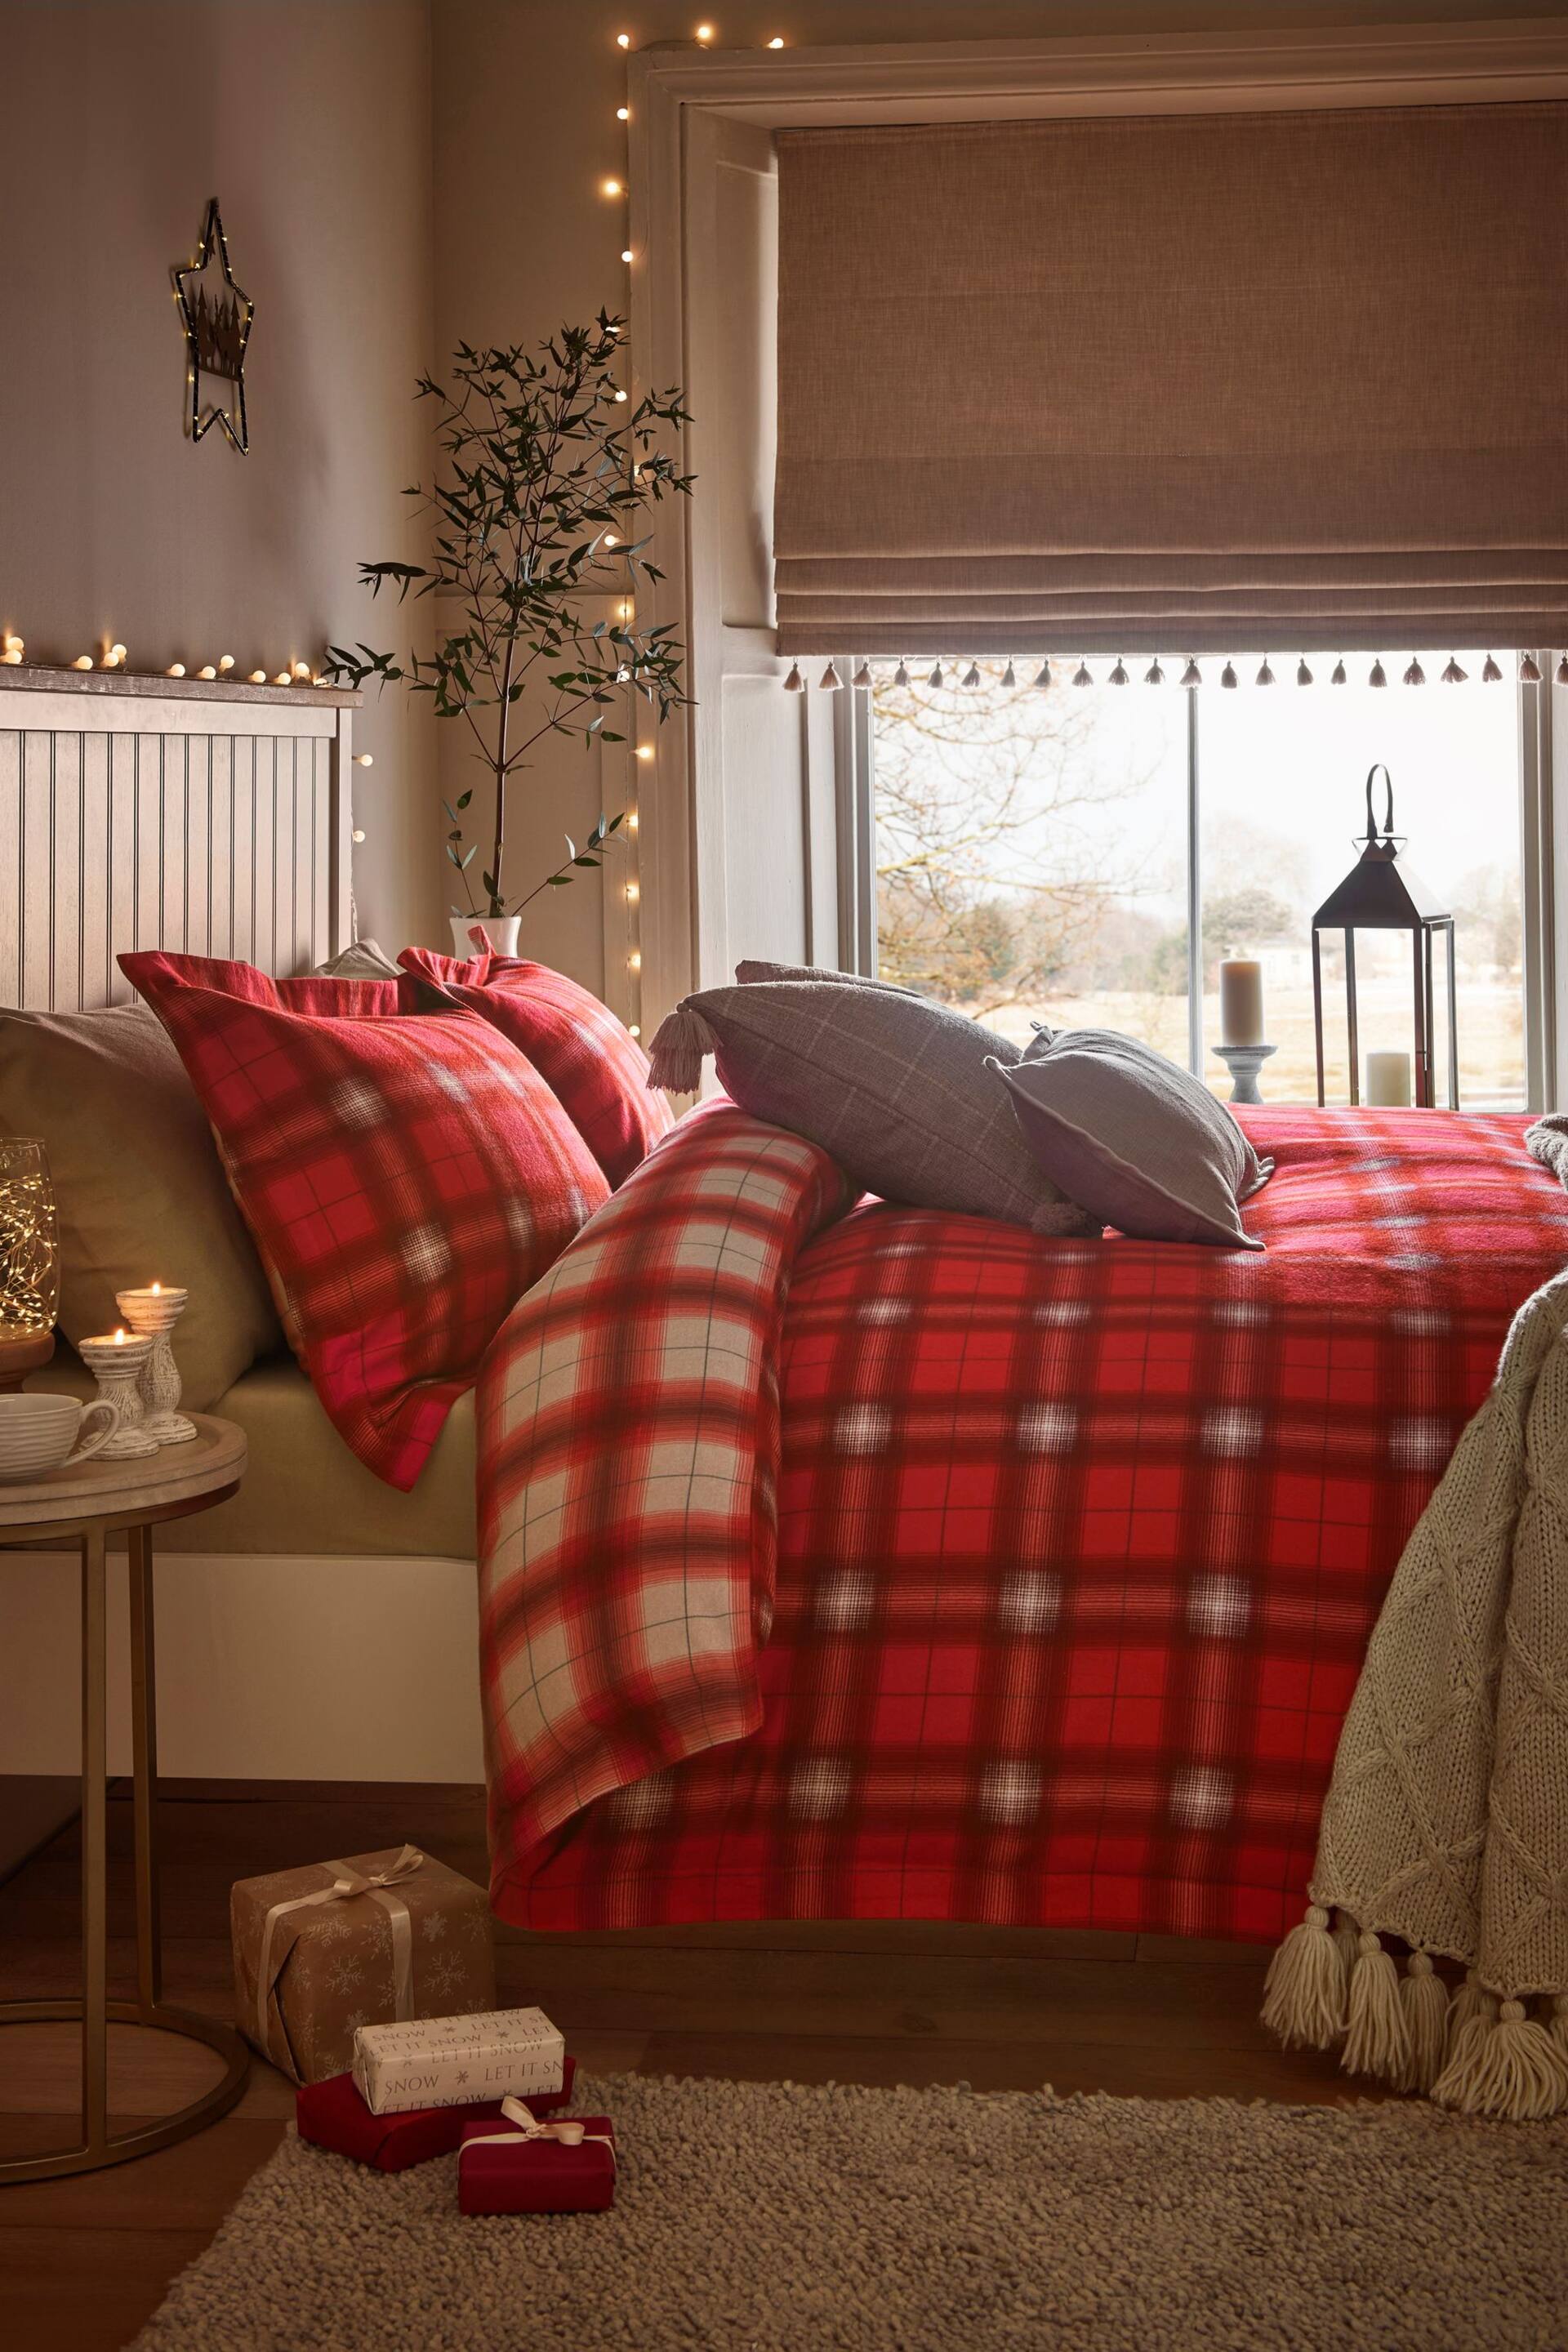 Red Check Reversible Christmas Brushed Cotton Oxford Duvet Cover and Pillowcase Set - Image 1 of 9